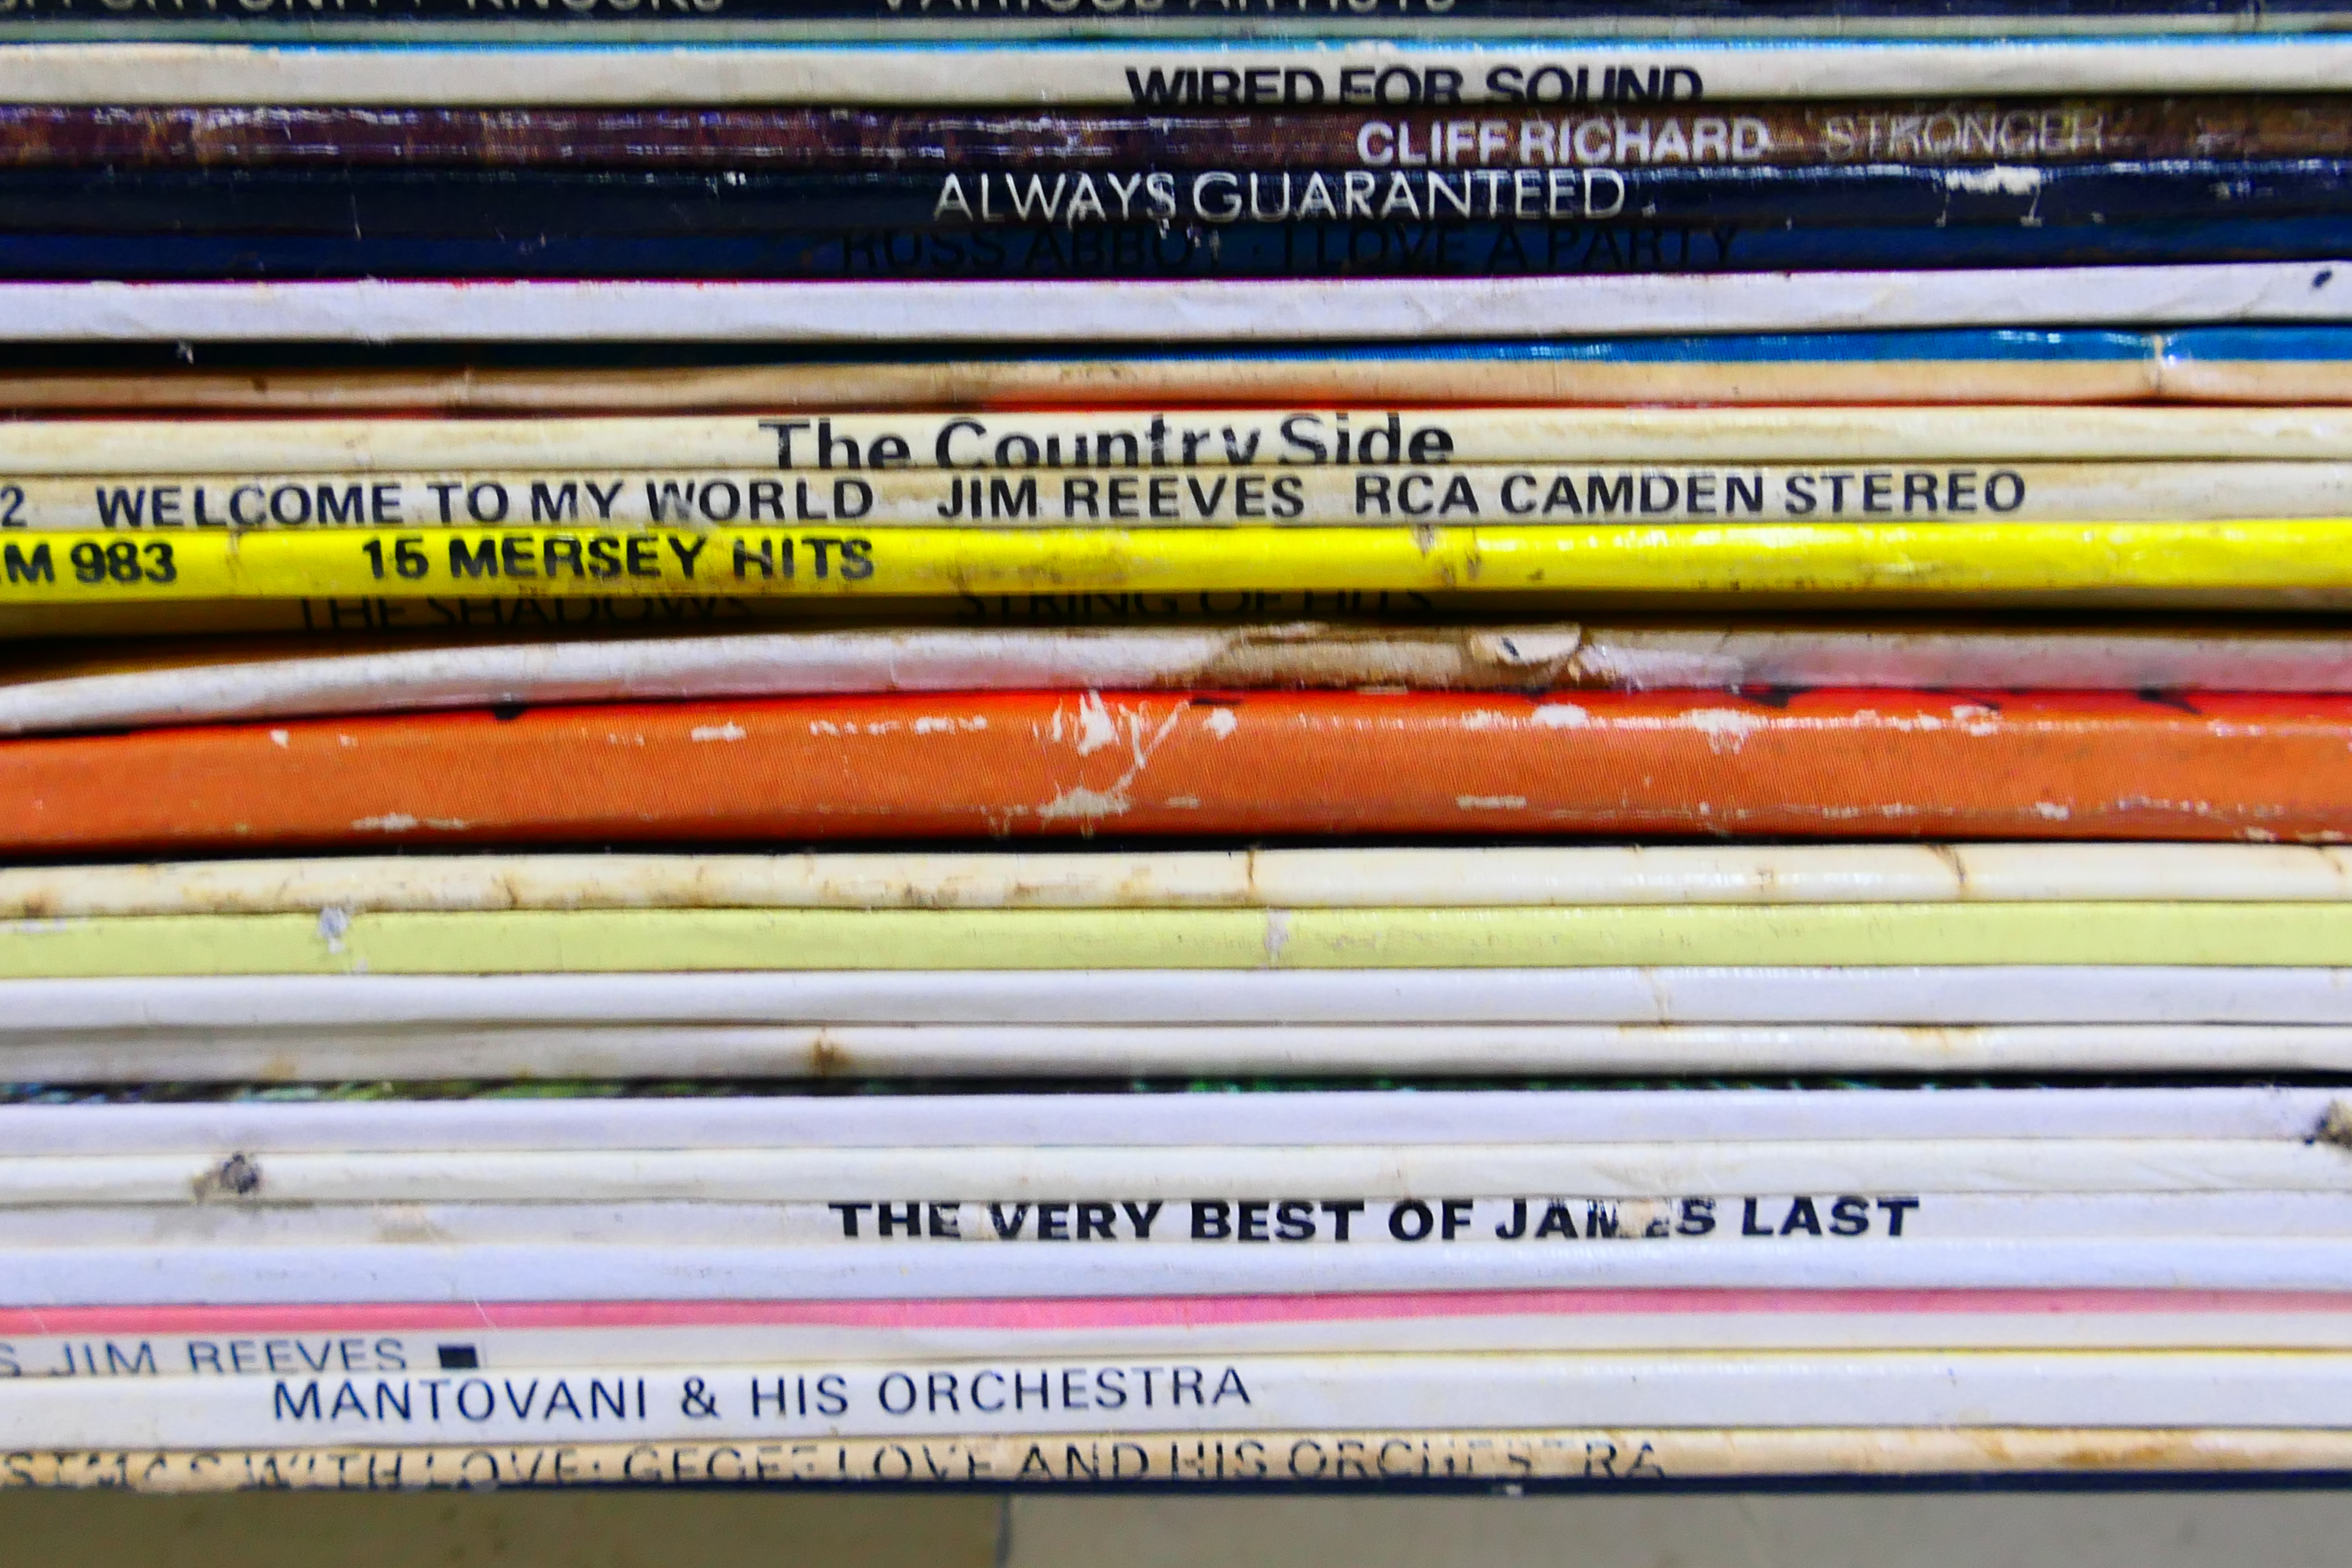 A collection of 12" vinyl records to include Jim Reeves, Elvis Presley Greatest Hits, Abba, - Image 4 of 6